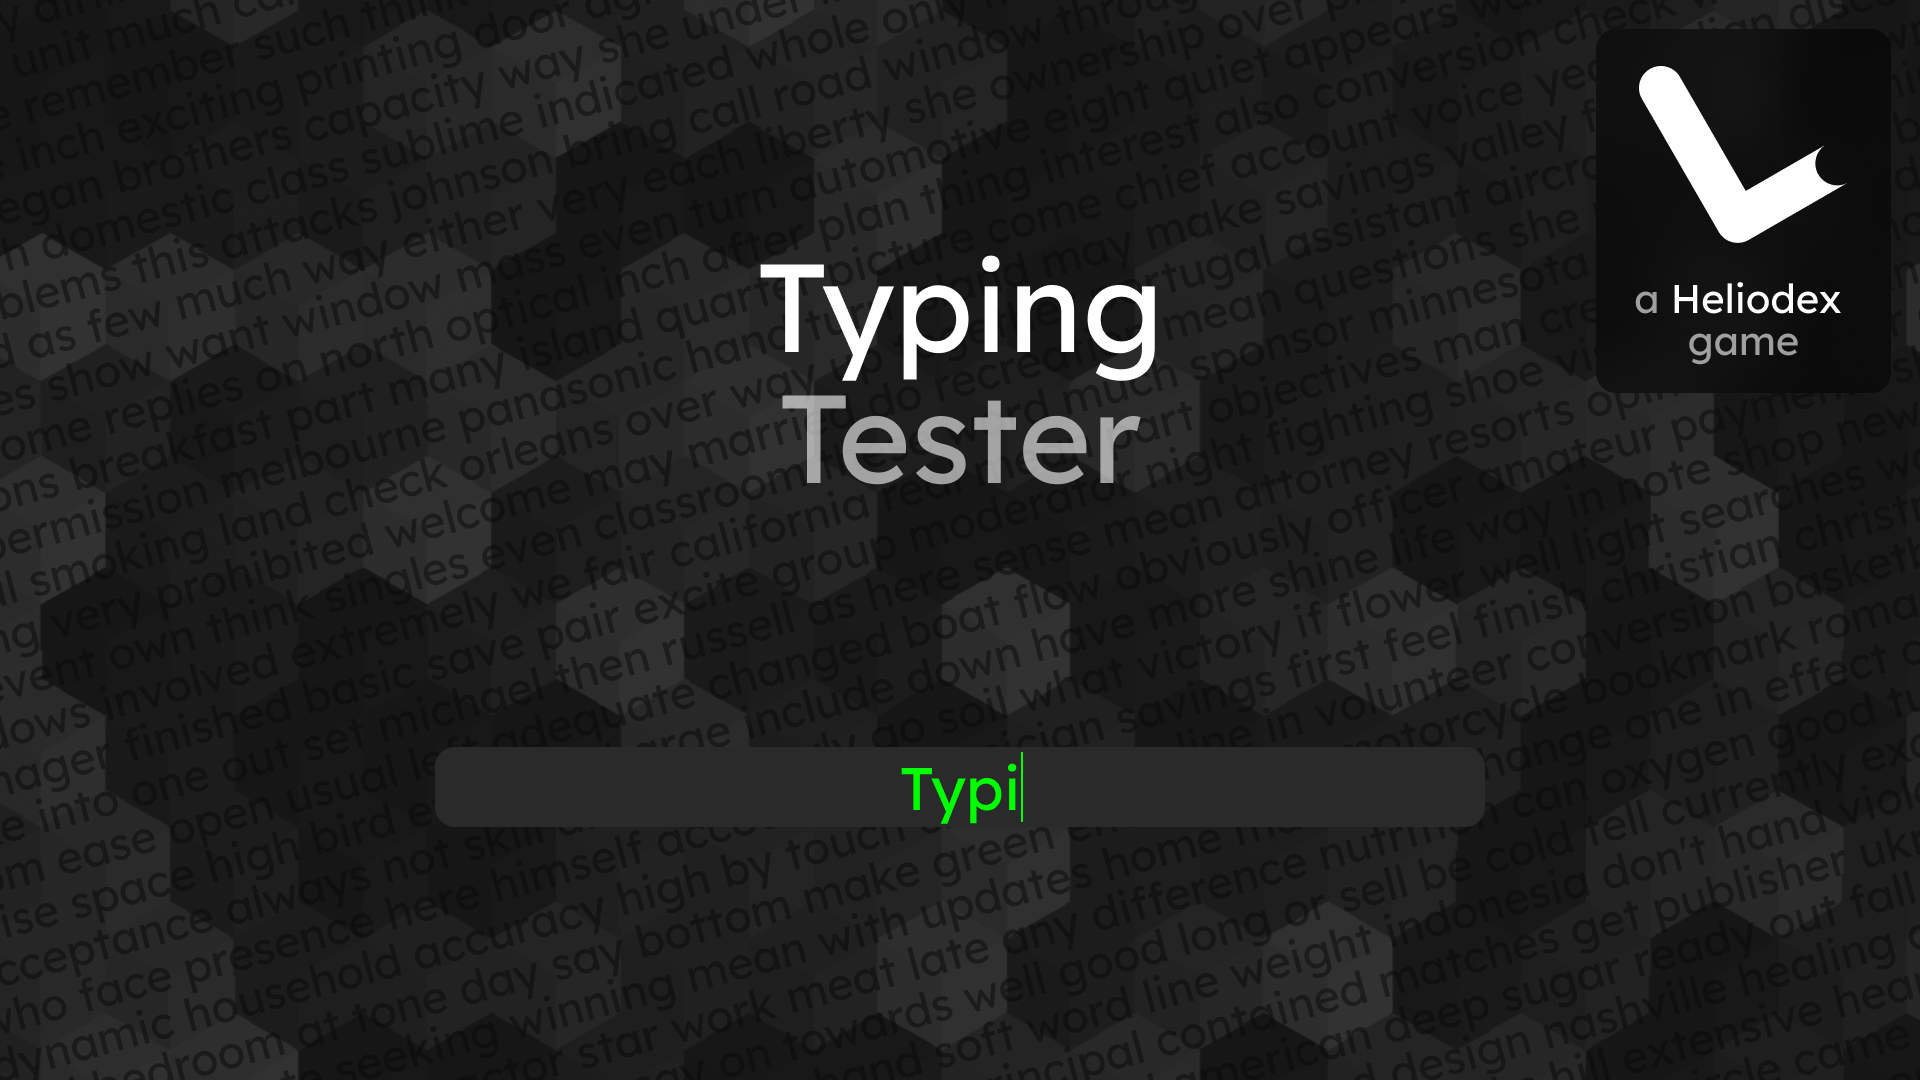 The thumbnail for Typing Tester